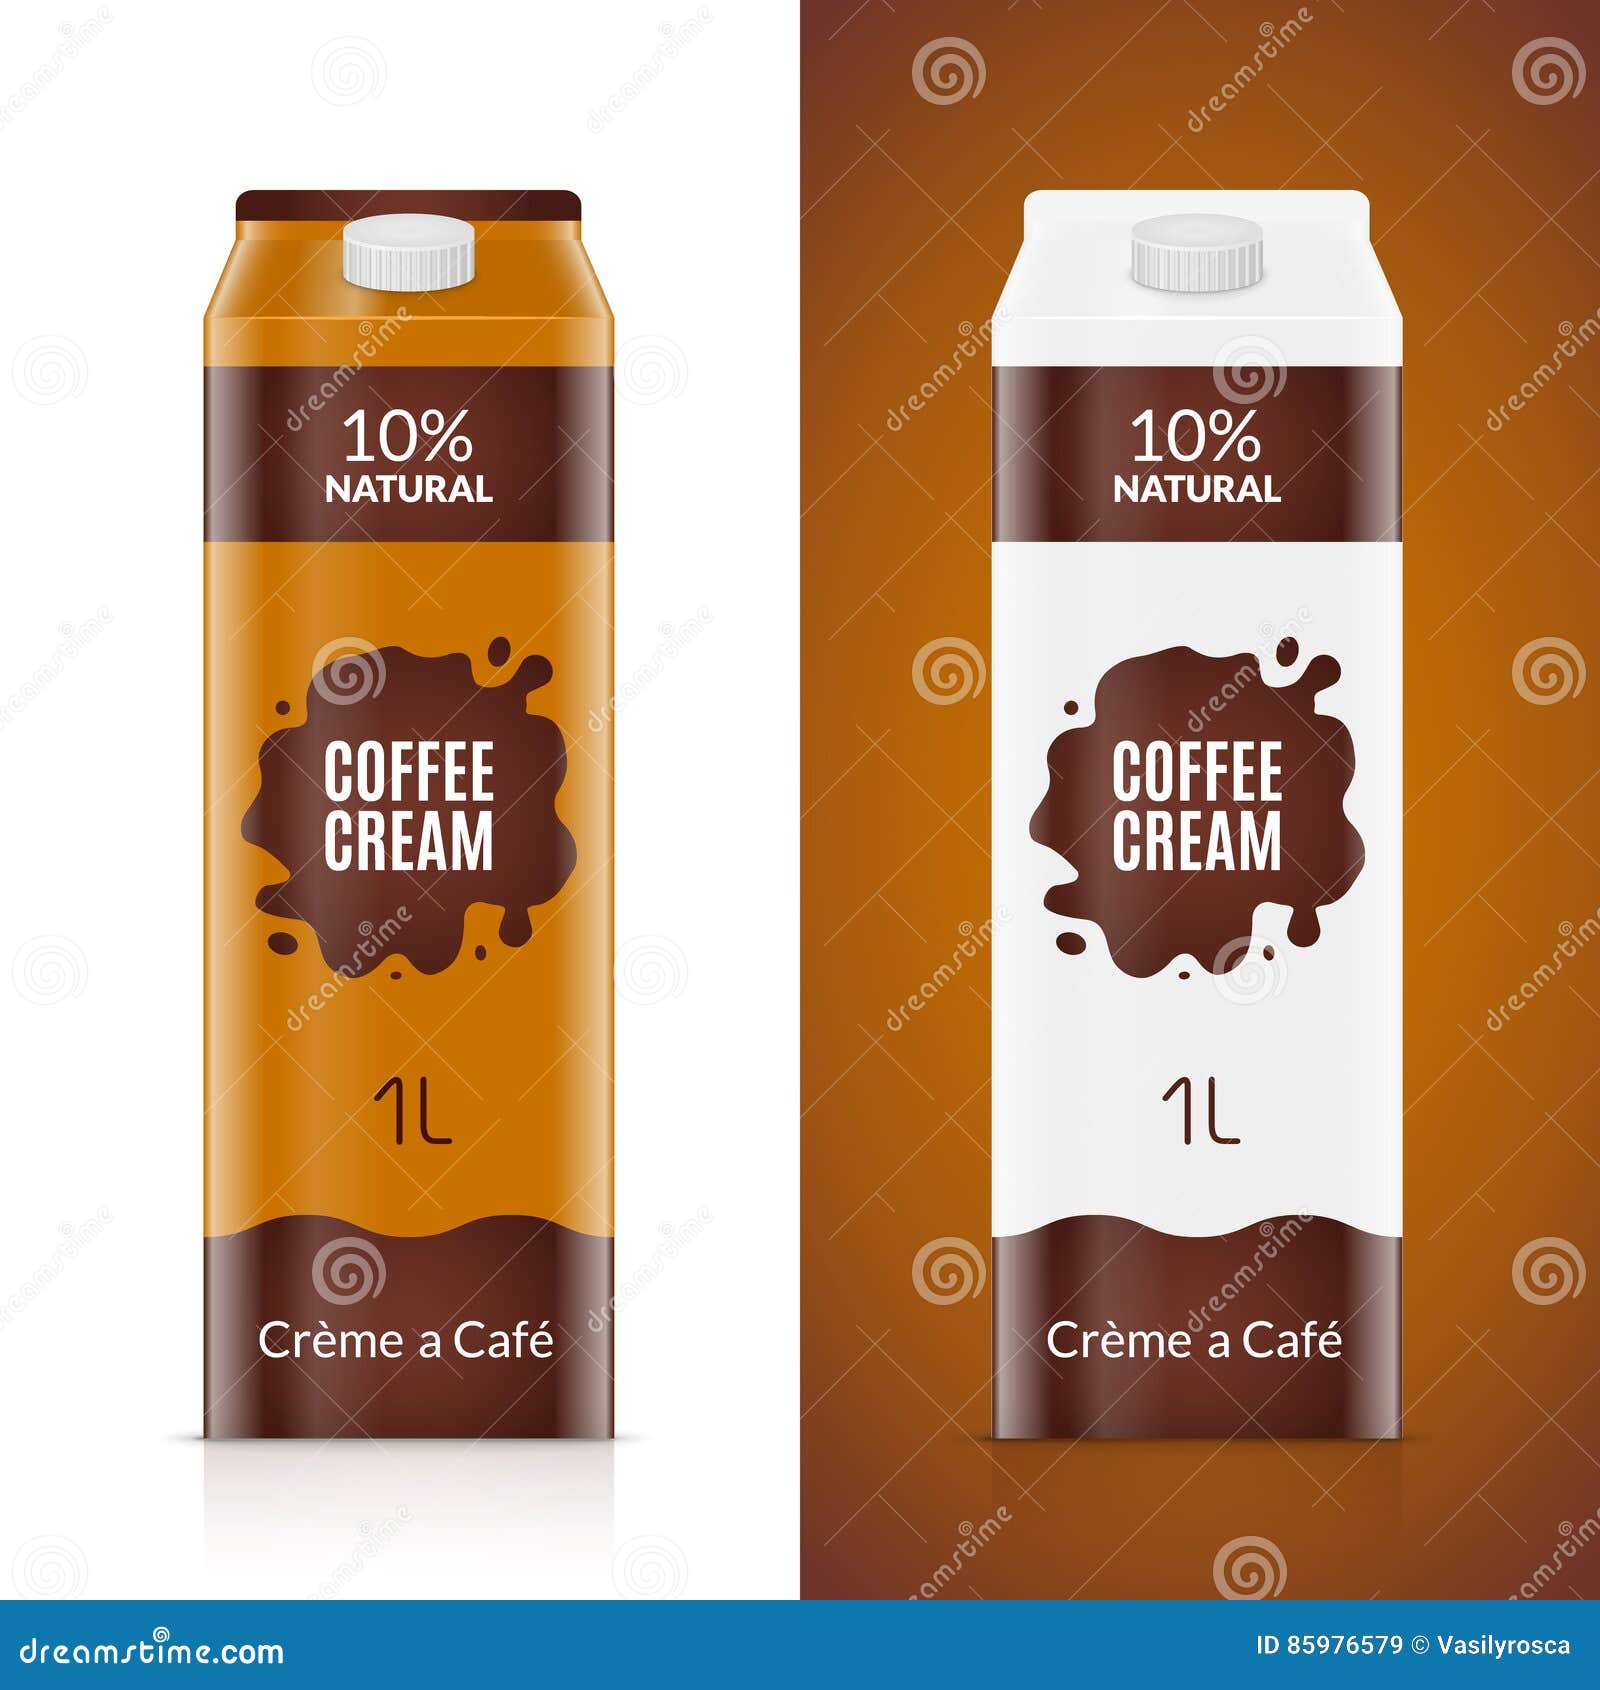 Download Coffee Cream Packaging Design Template. Cream Product ...